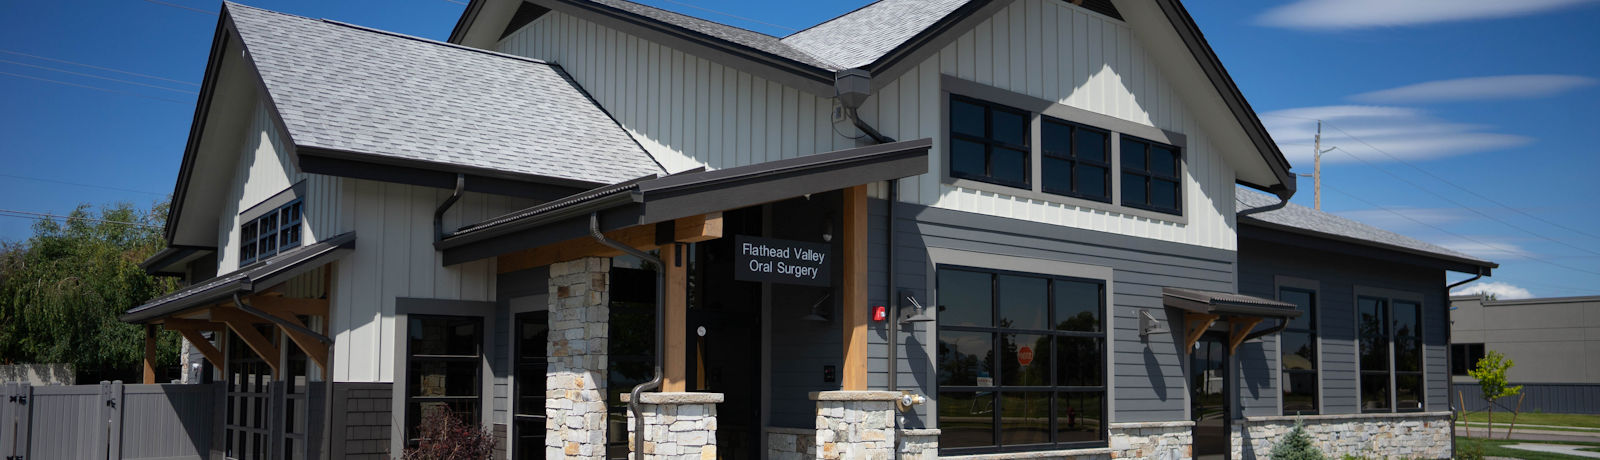 Greater Montana Oral and Dental Implant Surgery